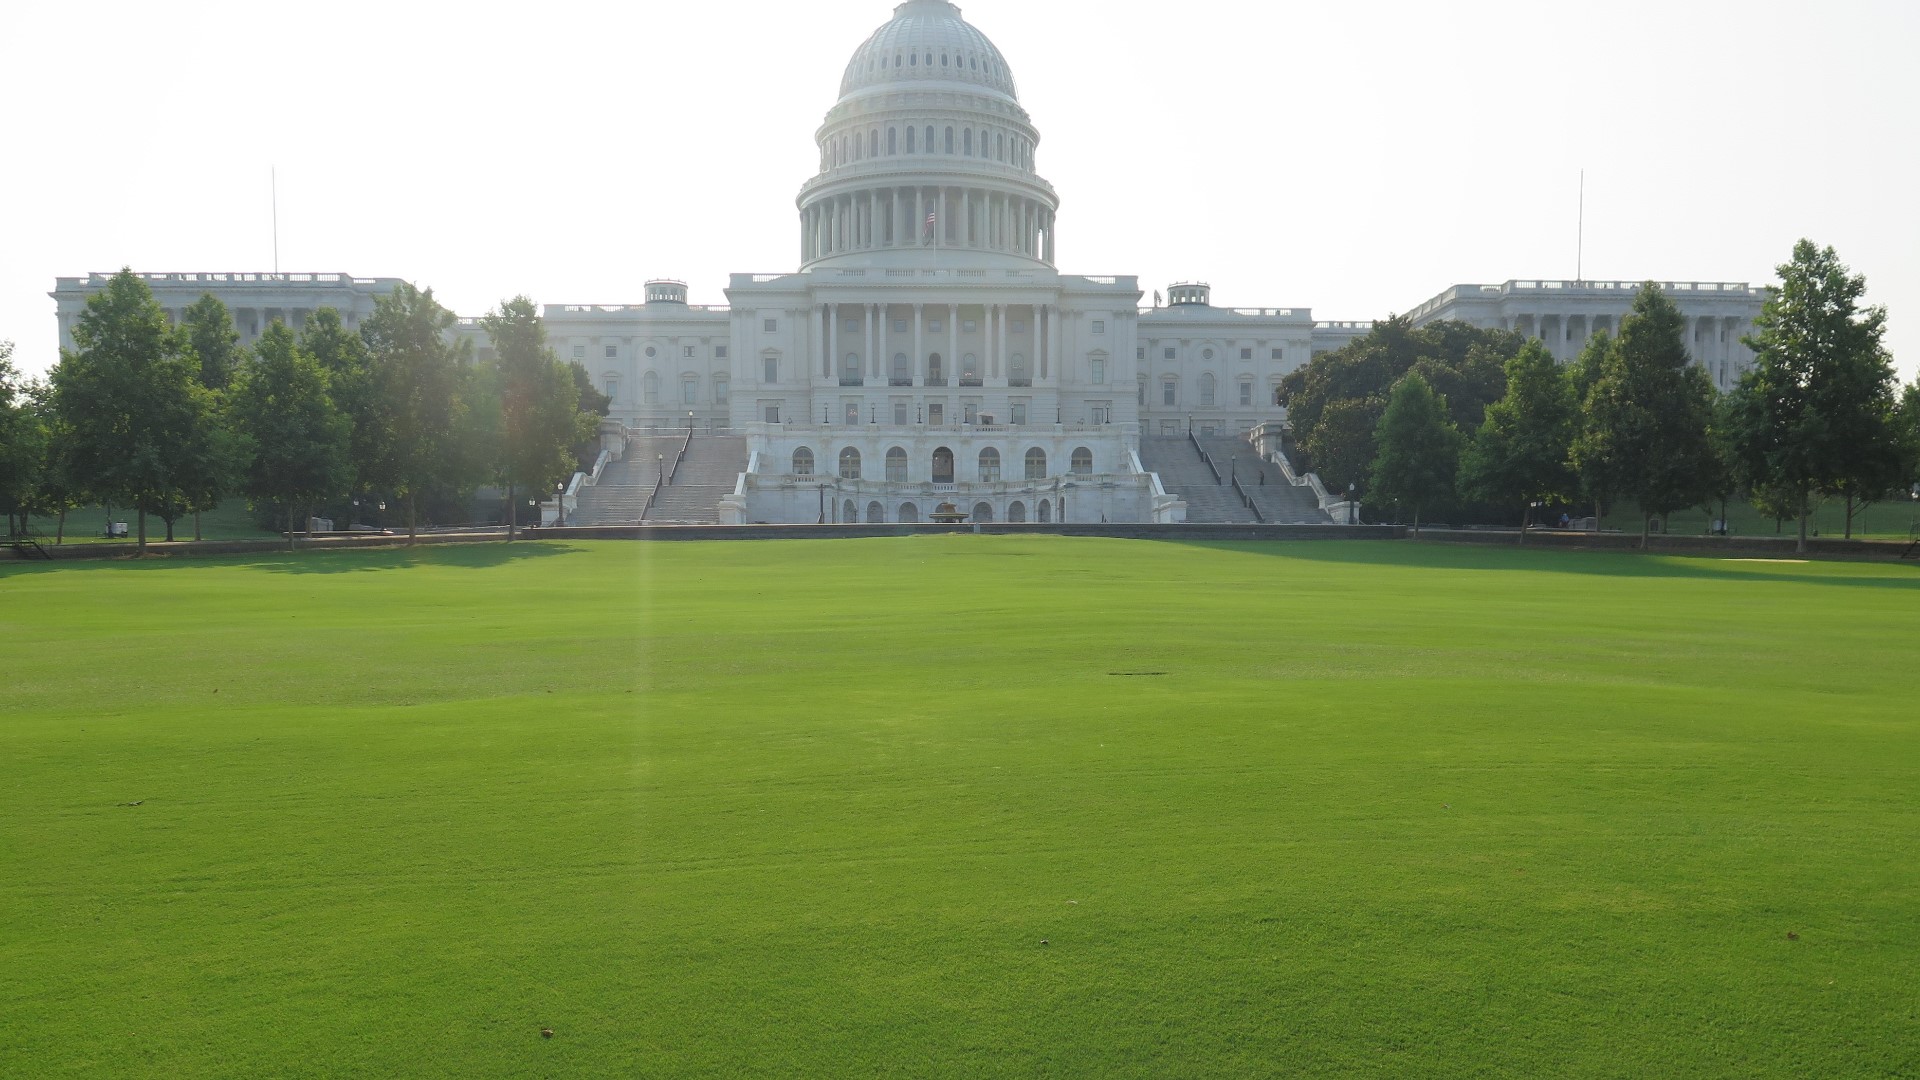 With a government shutdown perhaps on the way, the Verify team looked into the impacts of a potential costly government shutdown.